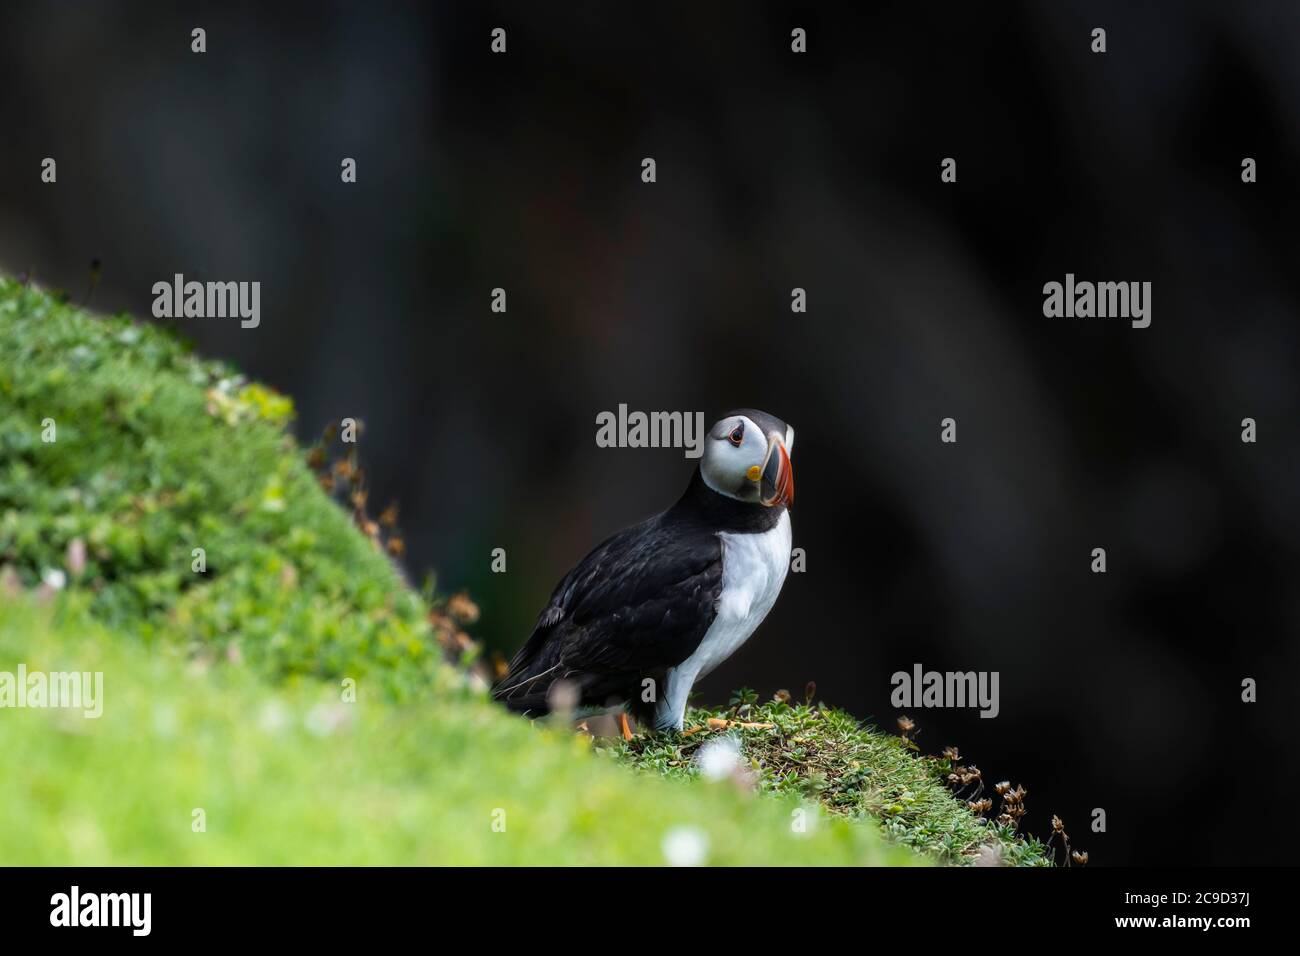 Atlantic puffin, Fratercula arctica, resting atop a cliff. Dark background  Great Saltee Island, South of Ireland. Stock Photo